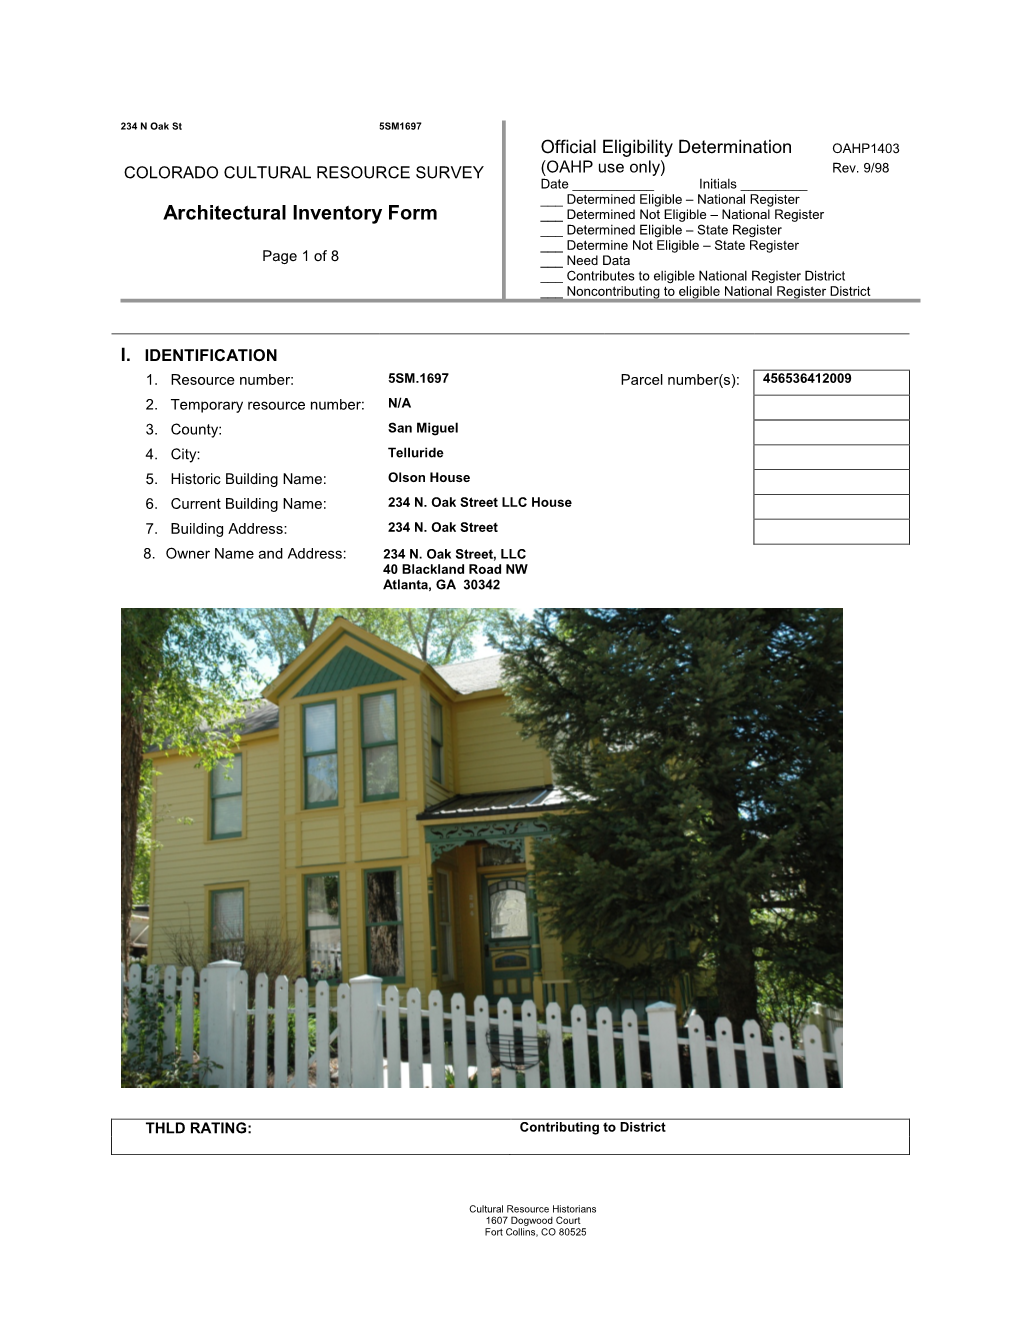 Architectural Inventory Form